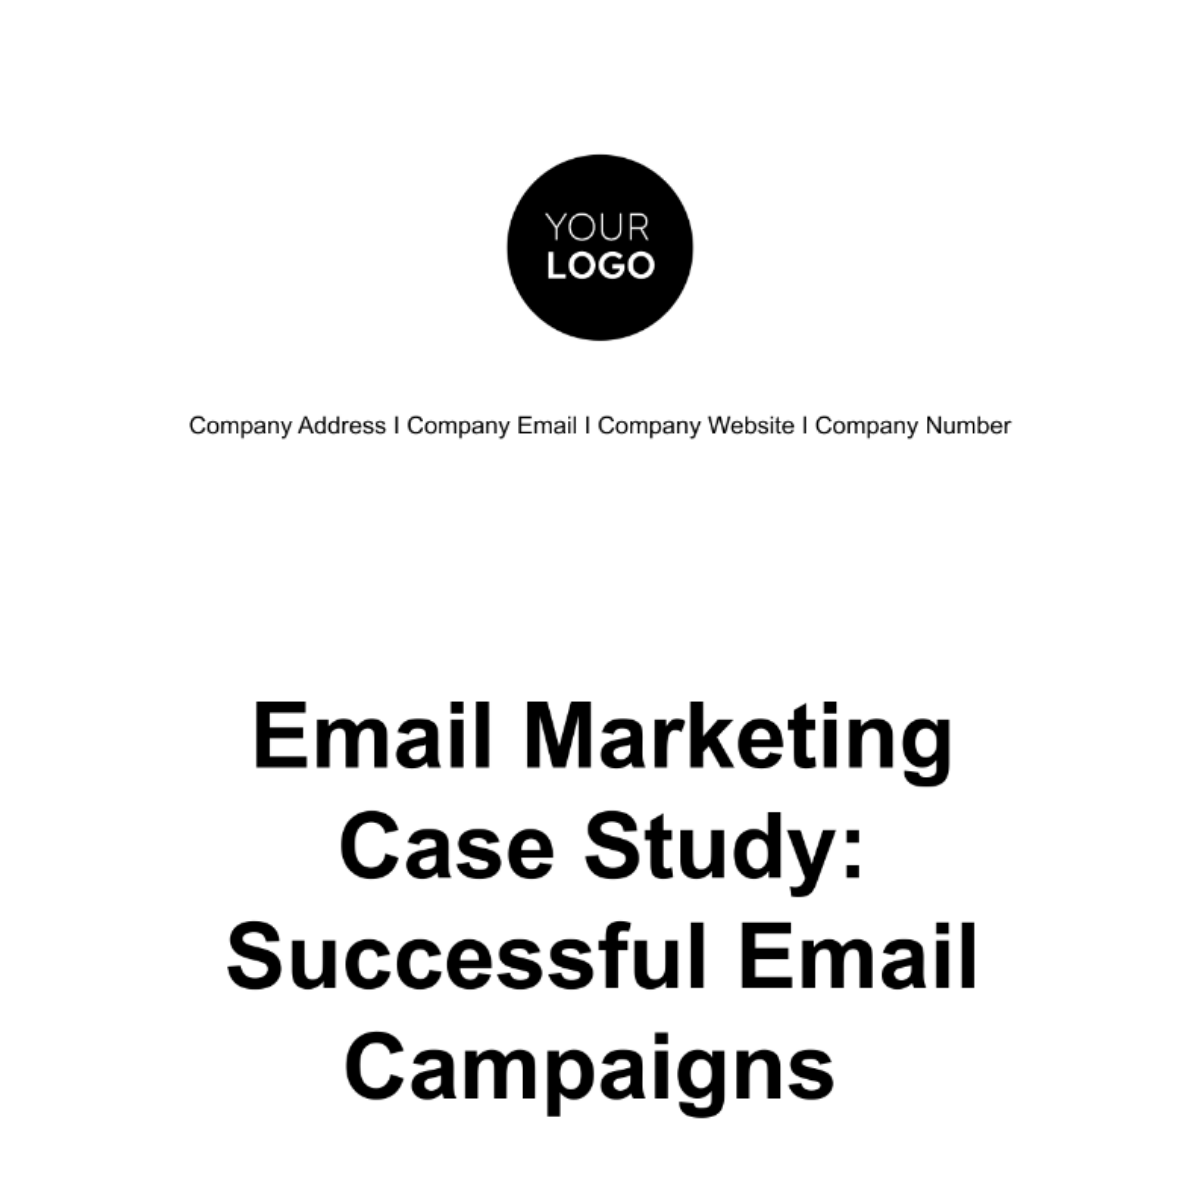 Free Email Marketing Case Study: Successful Email Campaigns Template